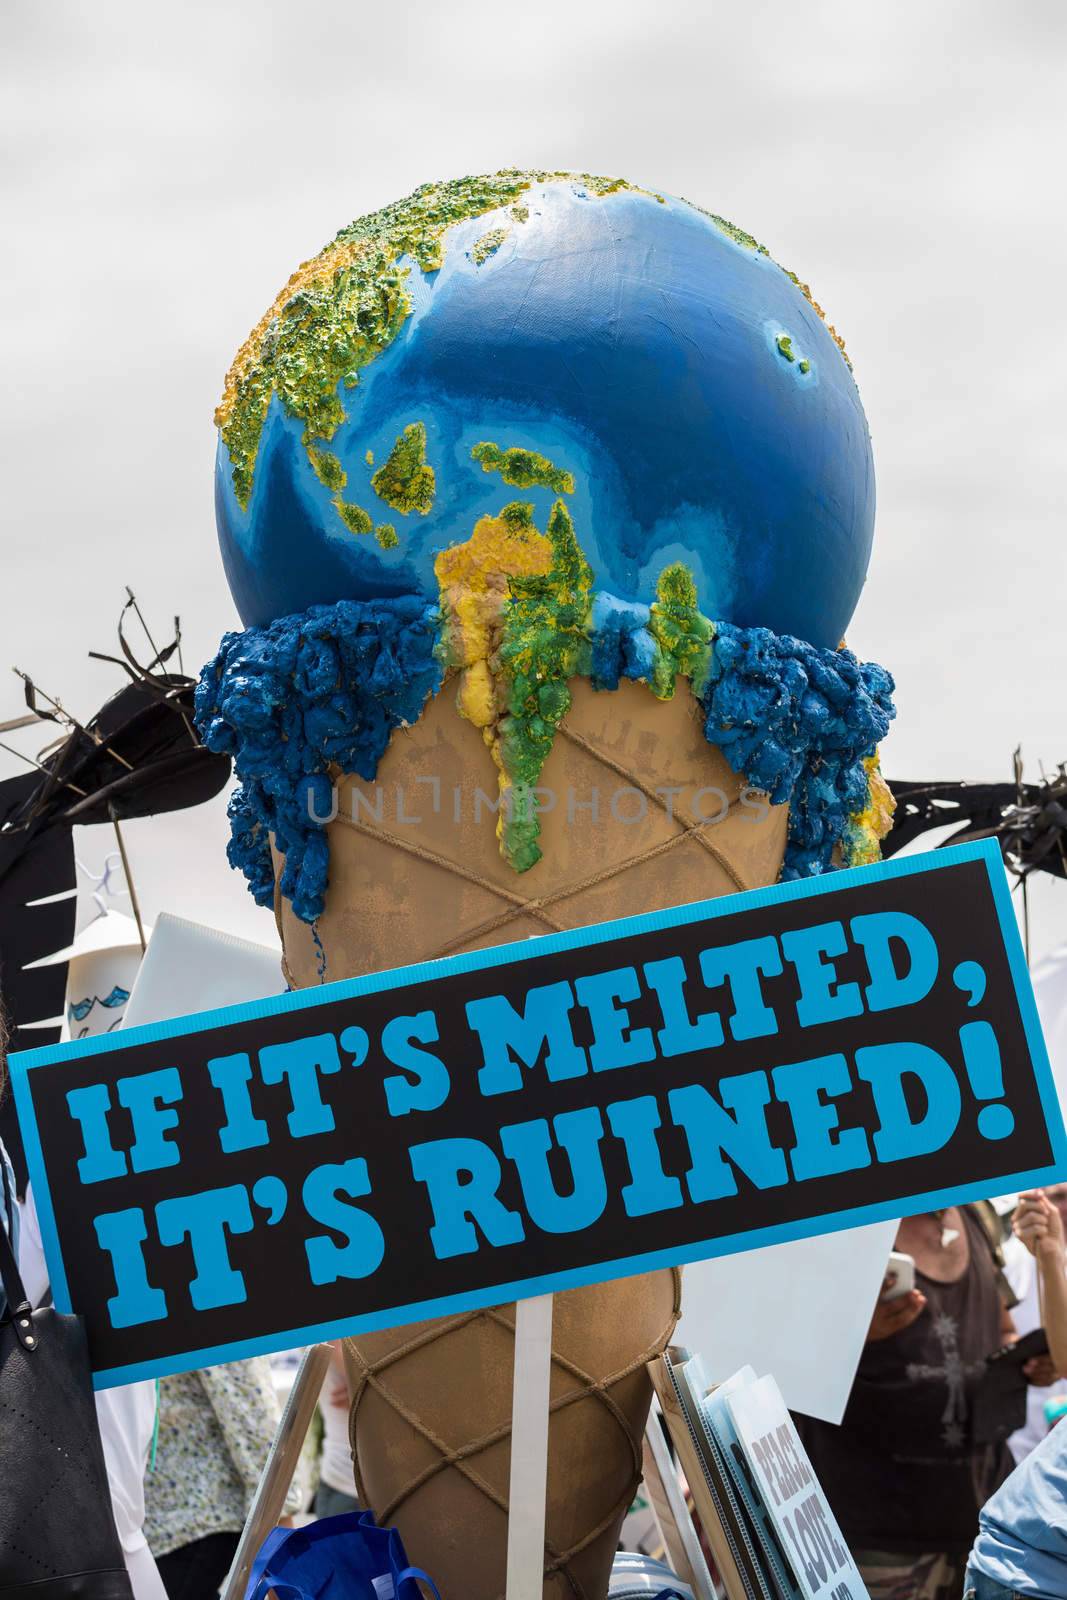 AUSTRALIA, Sydney: The earth as an icecream cone is shown as tens of thousands of Sydney protesters call for a focus on the cost of climate change to Pacific Islands on November 29, 2015, just ahead of the COP21 conference on climate change.  Australia's climate-sensitive neighbours in the Pacific were the focus for the climate change rally in Sydney as representatives of communities from Pacific nations of Tuvalu, Nauru, Kiribati and Tonga attend the march from the Domain to Circular Quay.  Climate change rallies rolled on across Australia over the weekend in Melbourne, Darwin, Brisbane and an unusually high turnout marches in Canberra.  